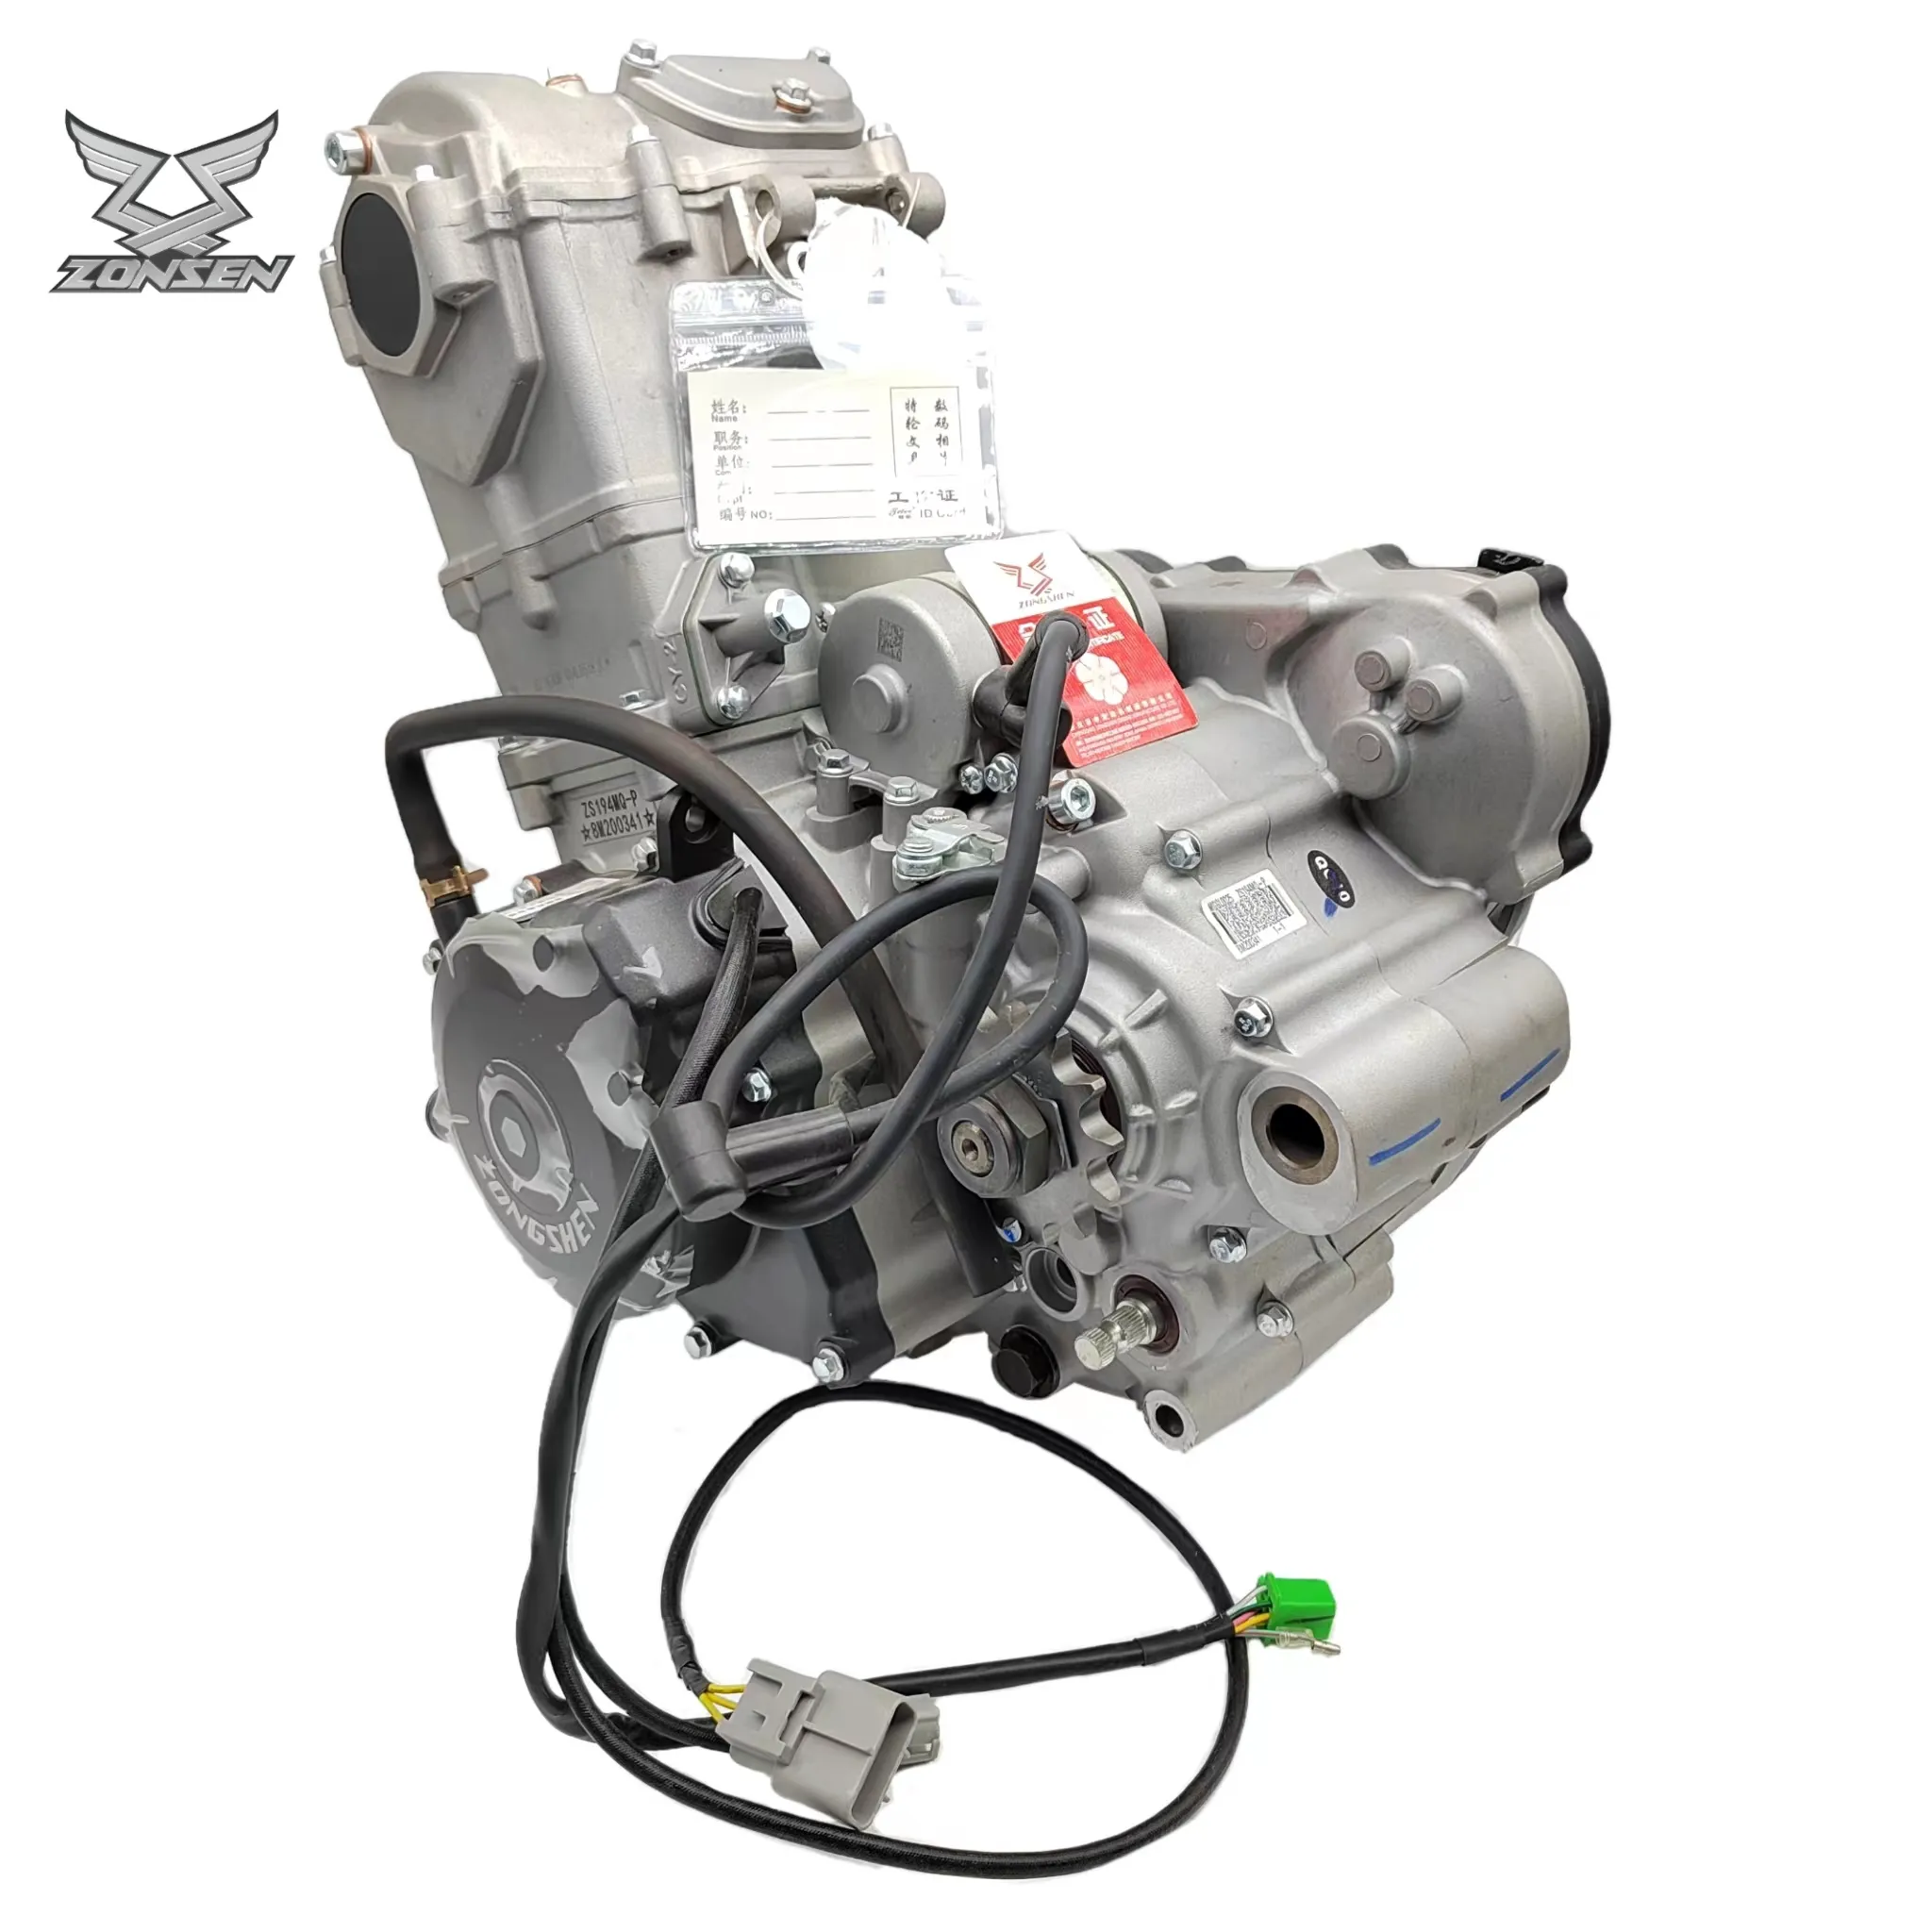 OEM Zongshen engine NC450cc water-cooled, 4-valve motorcycle 450cc engine assembly for motorcycle RX4